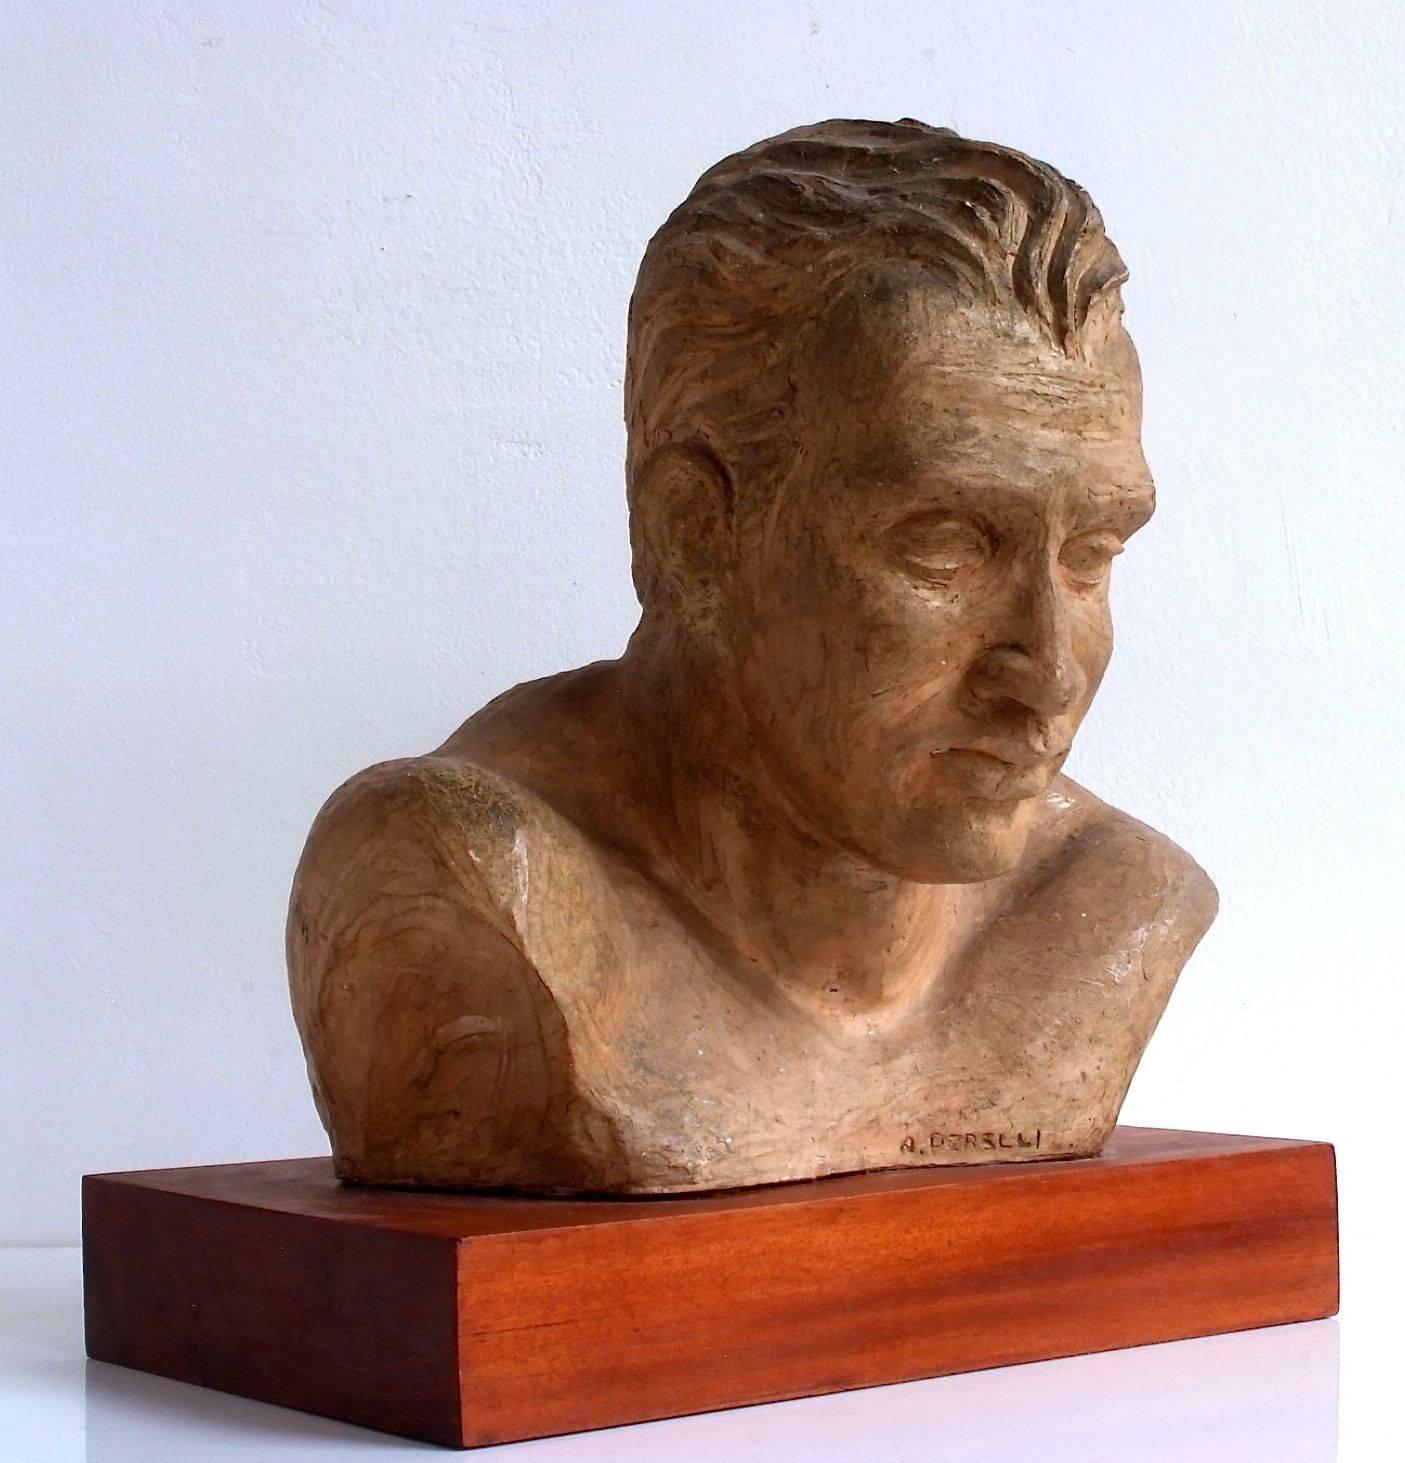 Intricate 1950s clay bust of an athlete signed by A. Perelli mounted a wood base. The work is in very good condition from all sides, nice patina.
Base: W 11.5 in x D 7 in x H in. Sculpture 10.5 in x D 9.5 in x H 10.75 in.